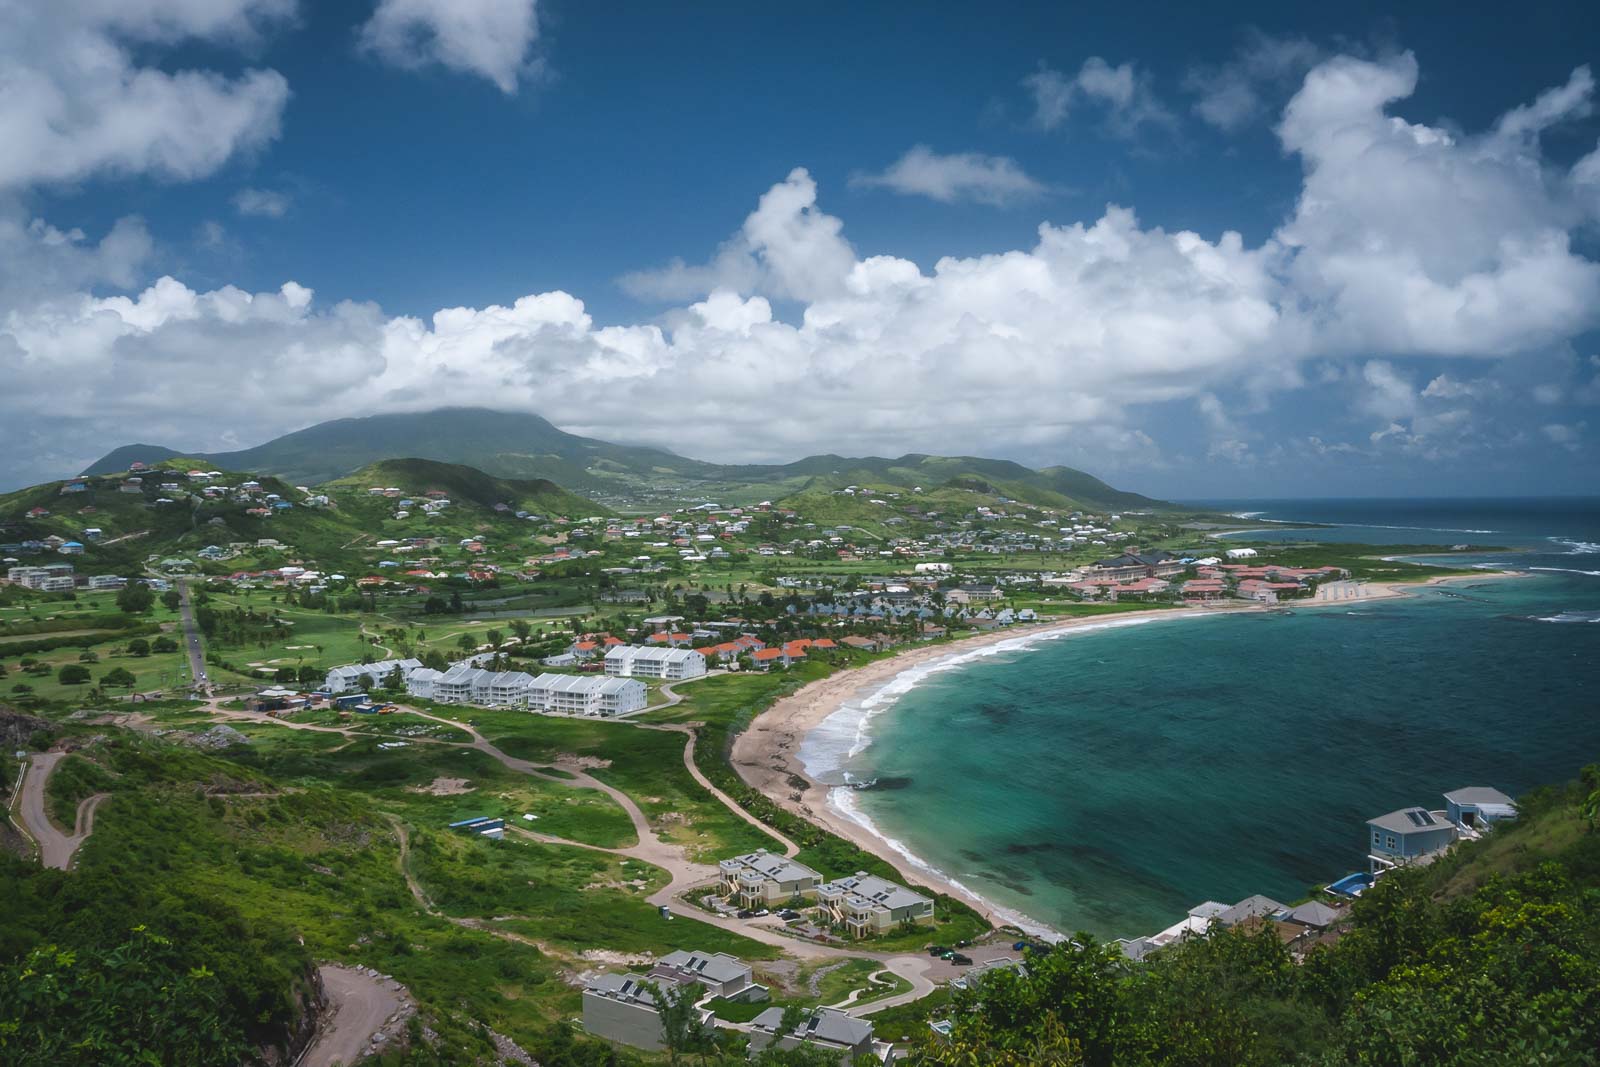 How to Get to Saint Kitts and Nevis 10 Popular tourist attractions , Other important information that tourists should know